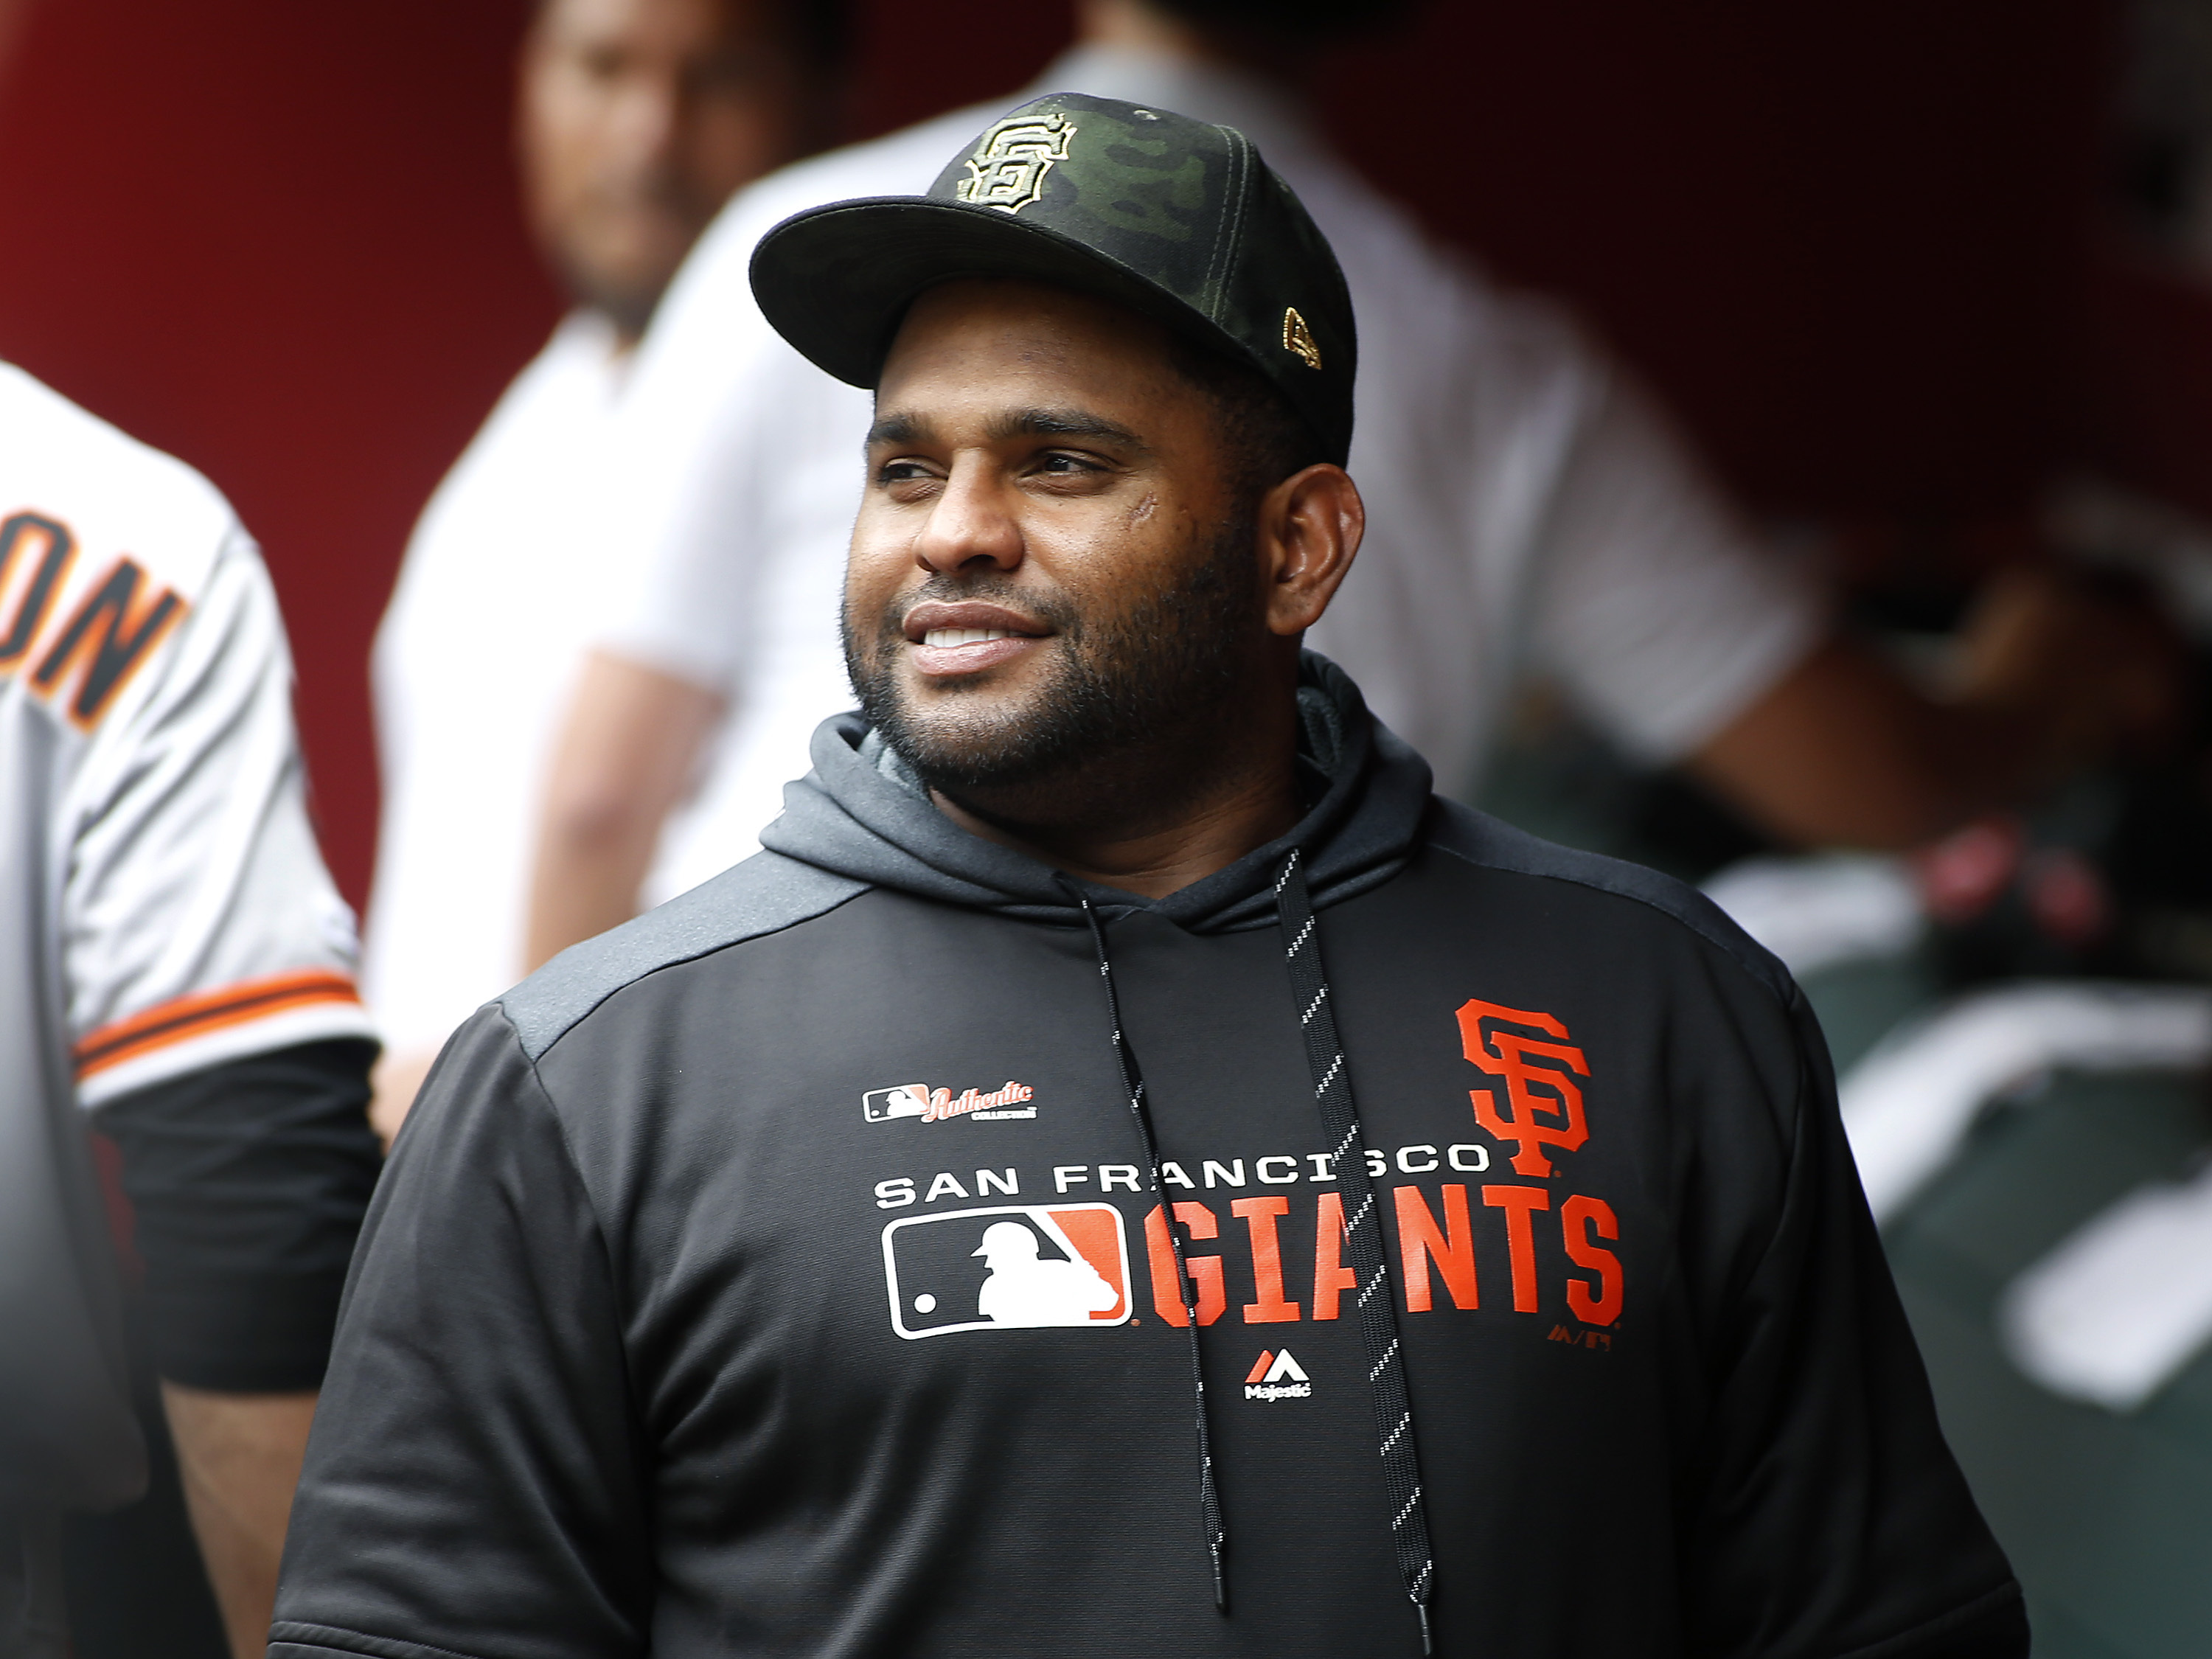 Pablo Sandoval, ex Boston Red Sox infielder, designated for assignment by  Giants (report) 